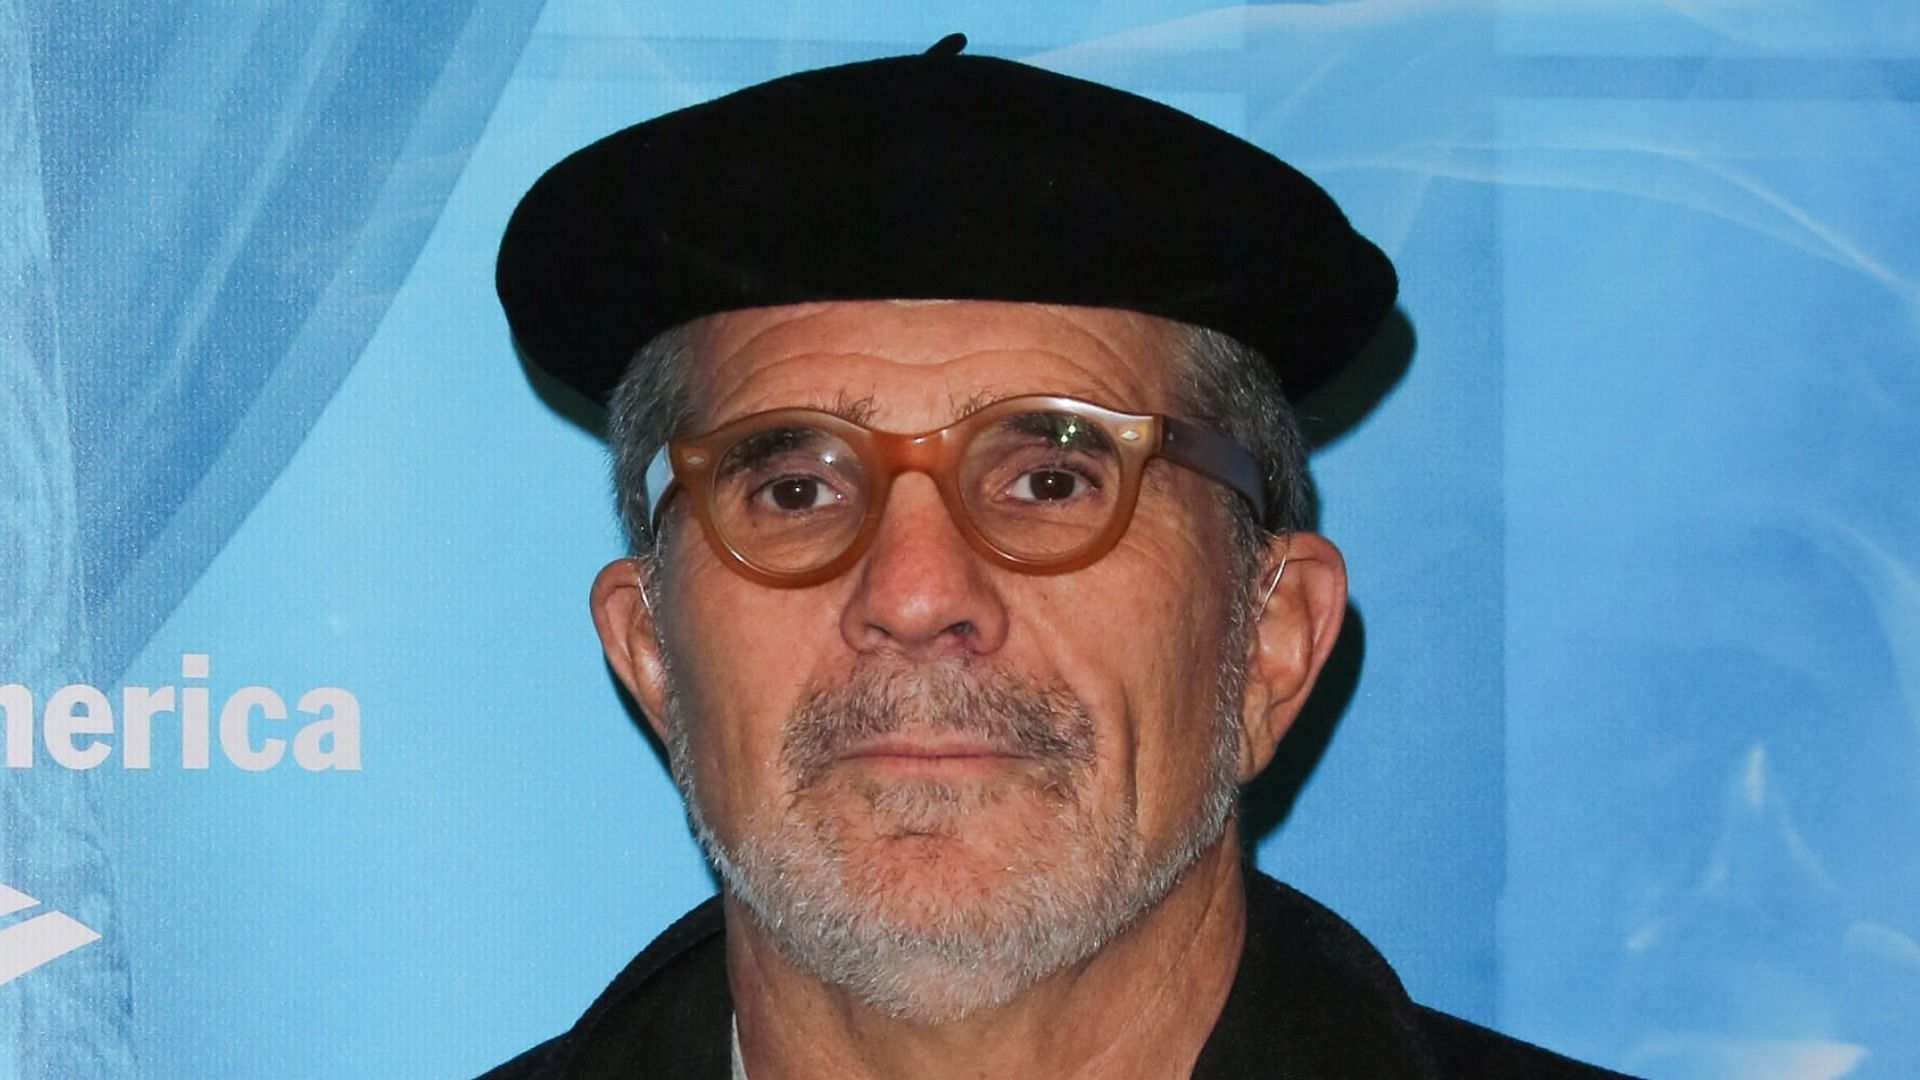 During an appearance on Fox News&rsquo; Life, Liberty &amp; Levin David Mamet claimed that teachers are predators (Image via Paul Archuleta/Getty Images)